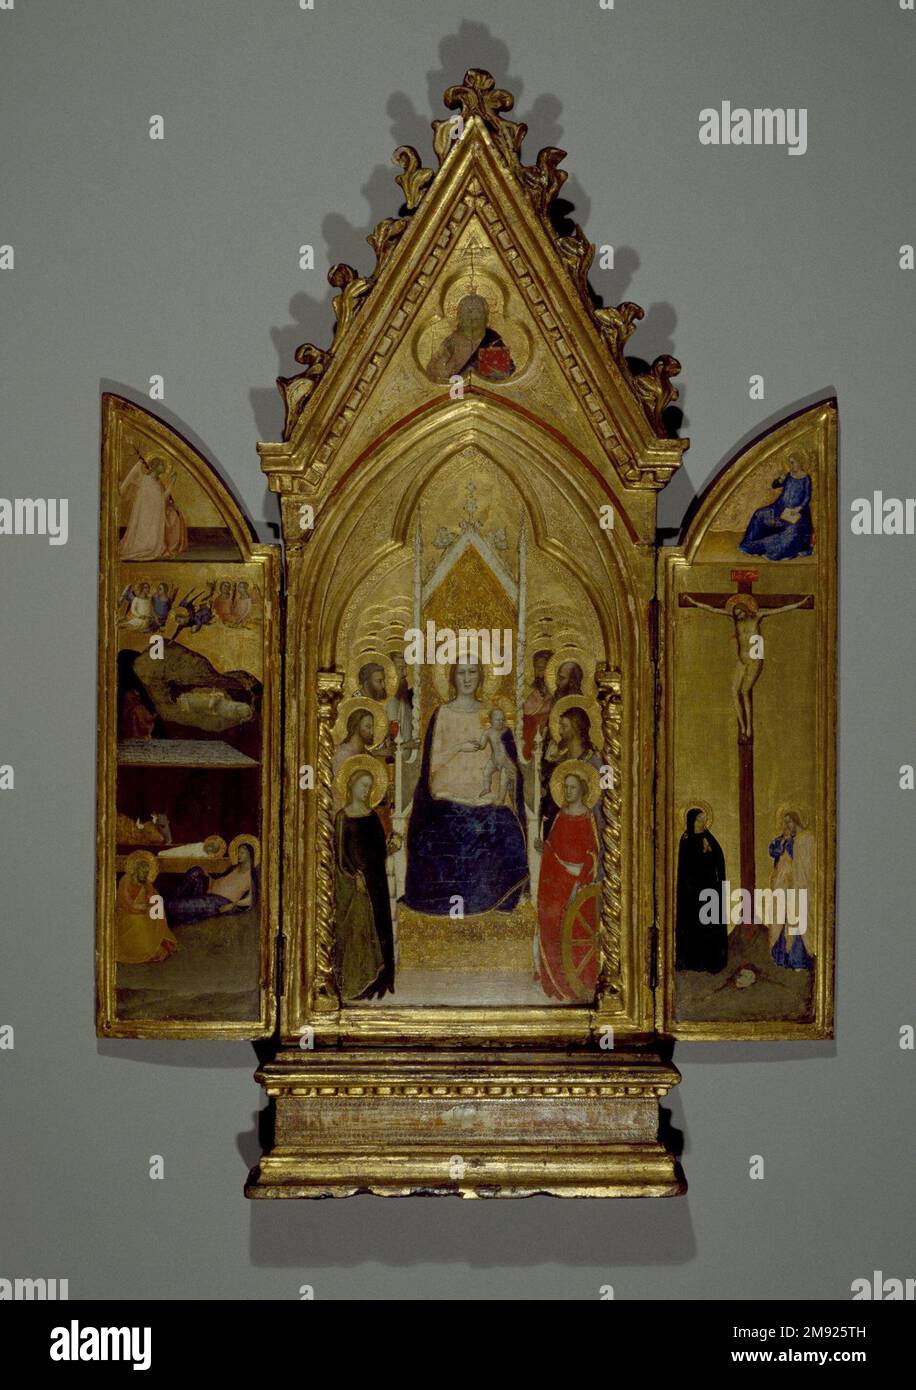 Triptych: Madonna with Saints and Christ Blessing (Center); The Nativity and the Annunciate Angel (Left Wing); Crucifixion and the Virgin Annunciate (Right Wing) Maso di Banco (Italian, Florentine School, 1341-1346). Triptych: Madonna with Saints and Christ Blessing (Center); The Nativity and the Annunciate Angel (Left Wing); Crucifixion and the Virgin Annunciate (Right Wing), ca. 1336. Tempera and tooled gold on poplar panel in original engaged frame, Center panel: 30 1/8 x 11 3/4 in. (76.5 x 29.8 cm).  This folding triptych (a painting on three panels) is filled with multiple figures and sce Stock Photo